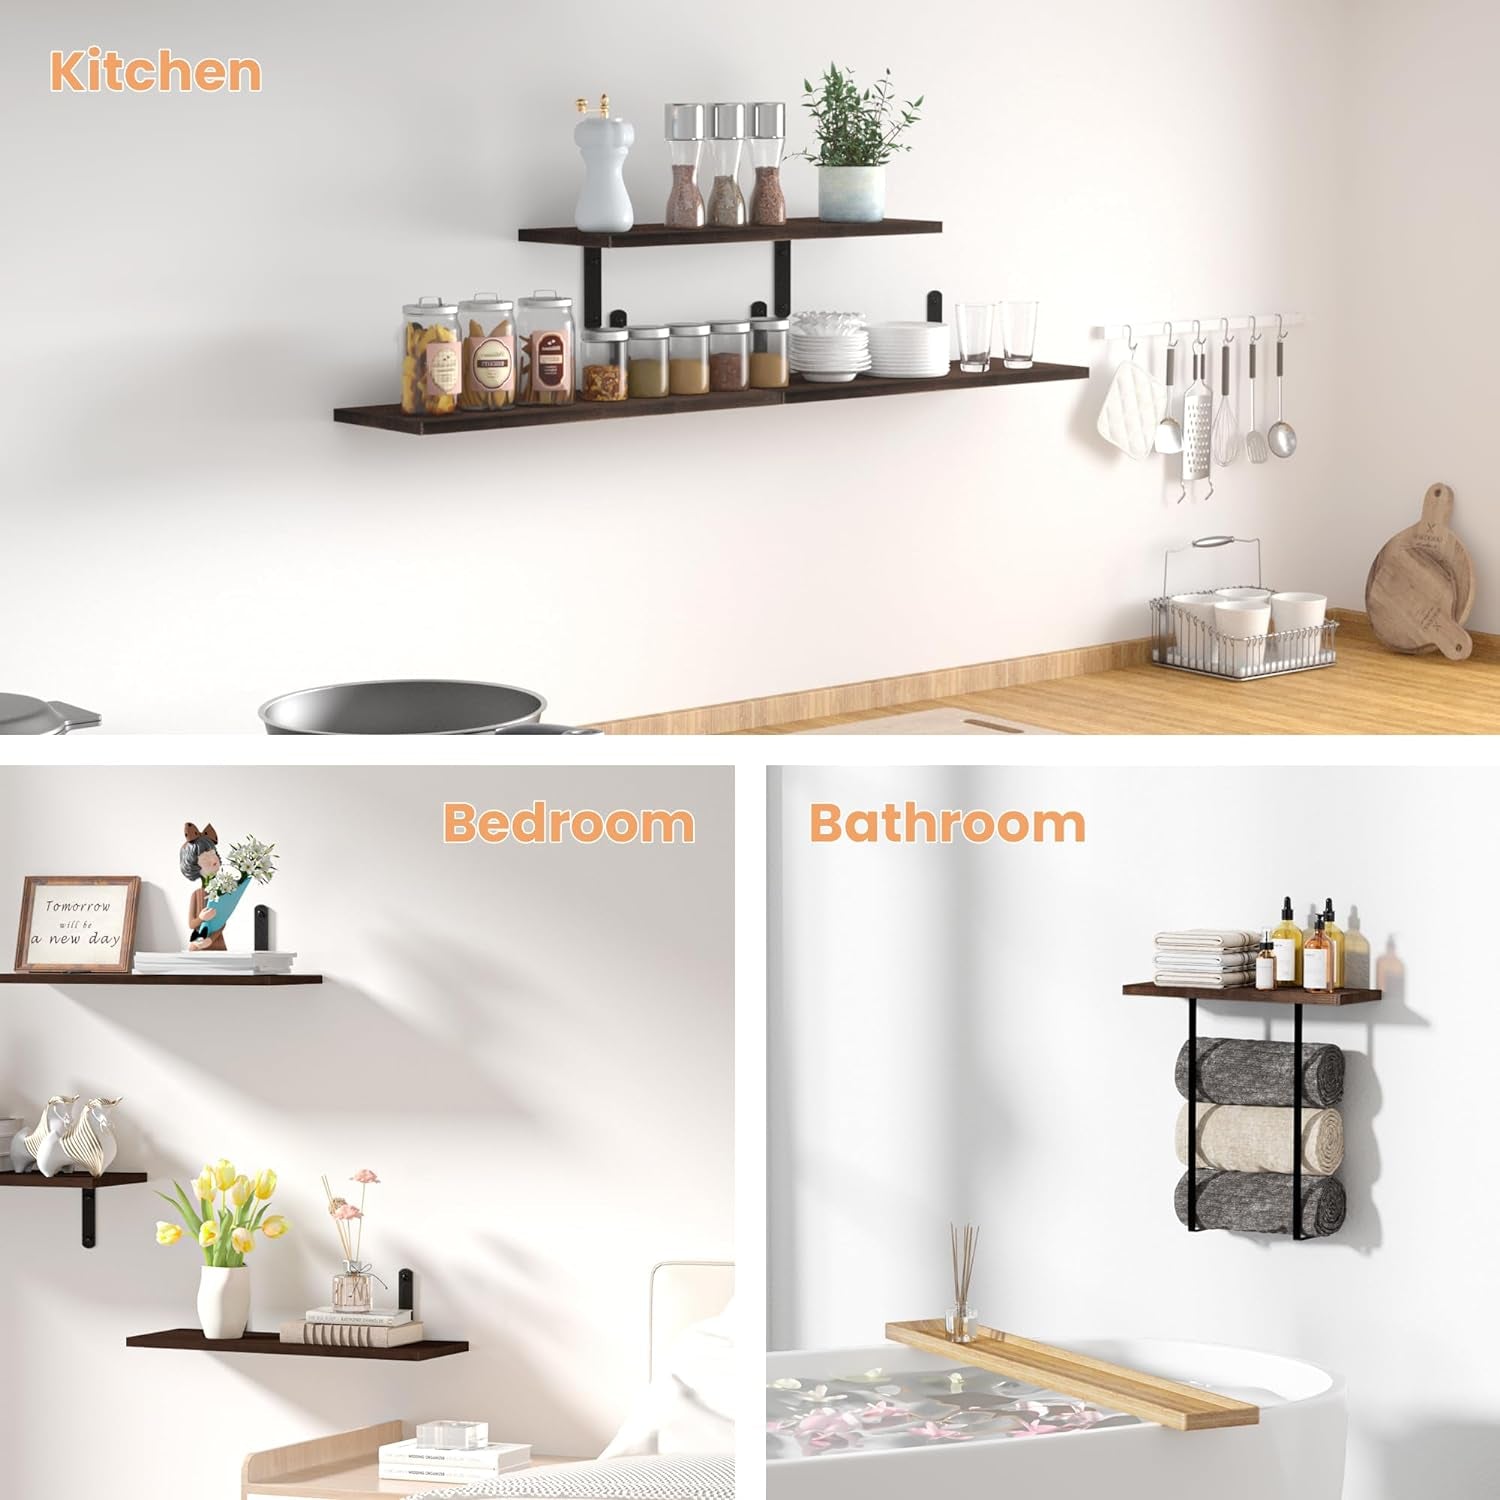 Bathroom Shelves over Toilet, 3+1 Tier Floating Shelves, Dark Brown Wooden Storage Wall Shelves with Towel Rack, Wall Mounted Hanging Shelf for Bedroom, Kitchen, Living Room, Laundry Décor